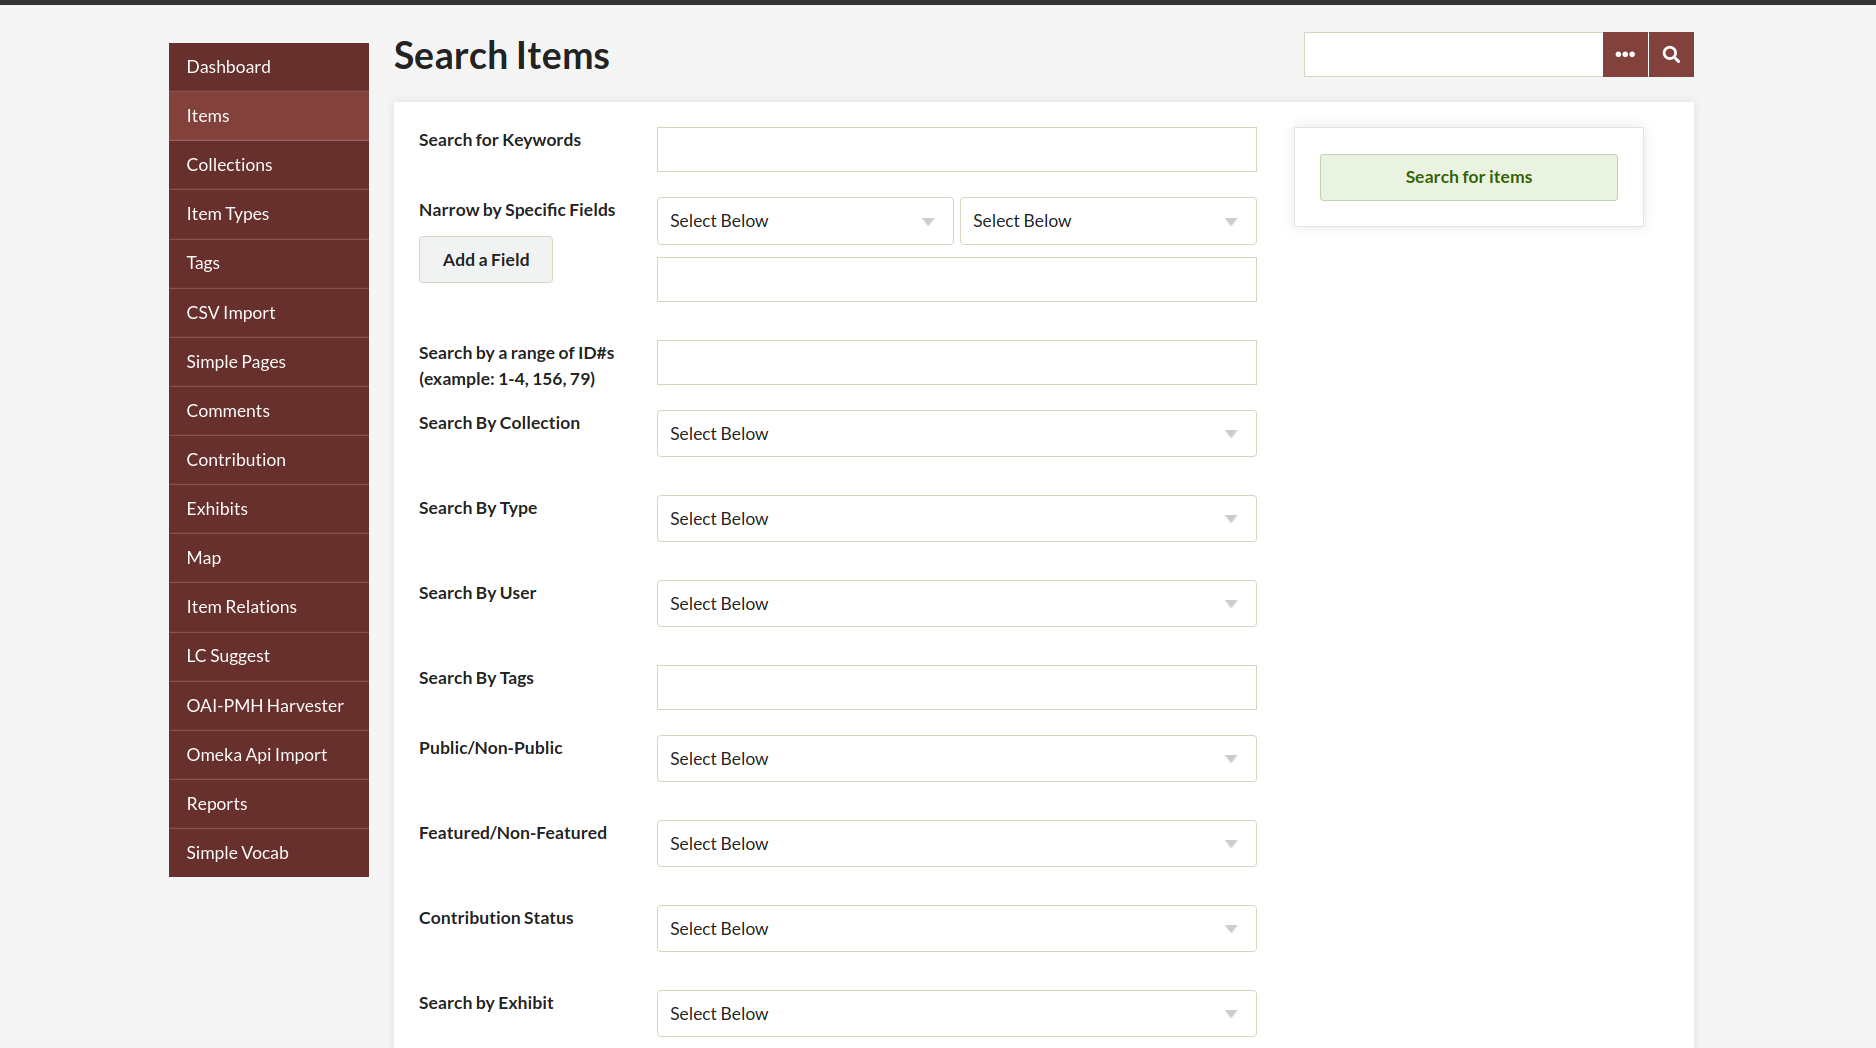 Admin view of the advanced search options, as described in the list below.